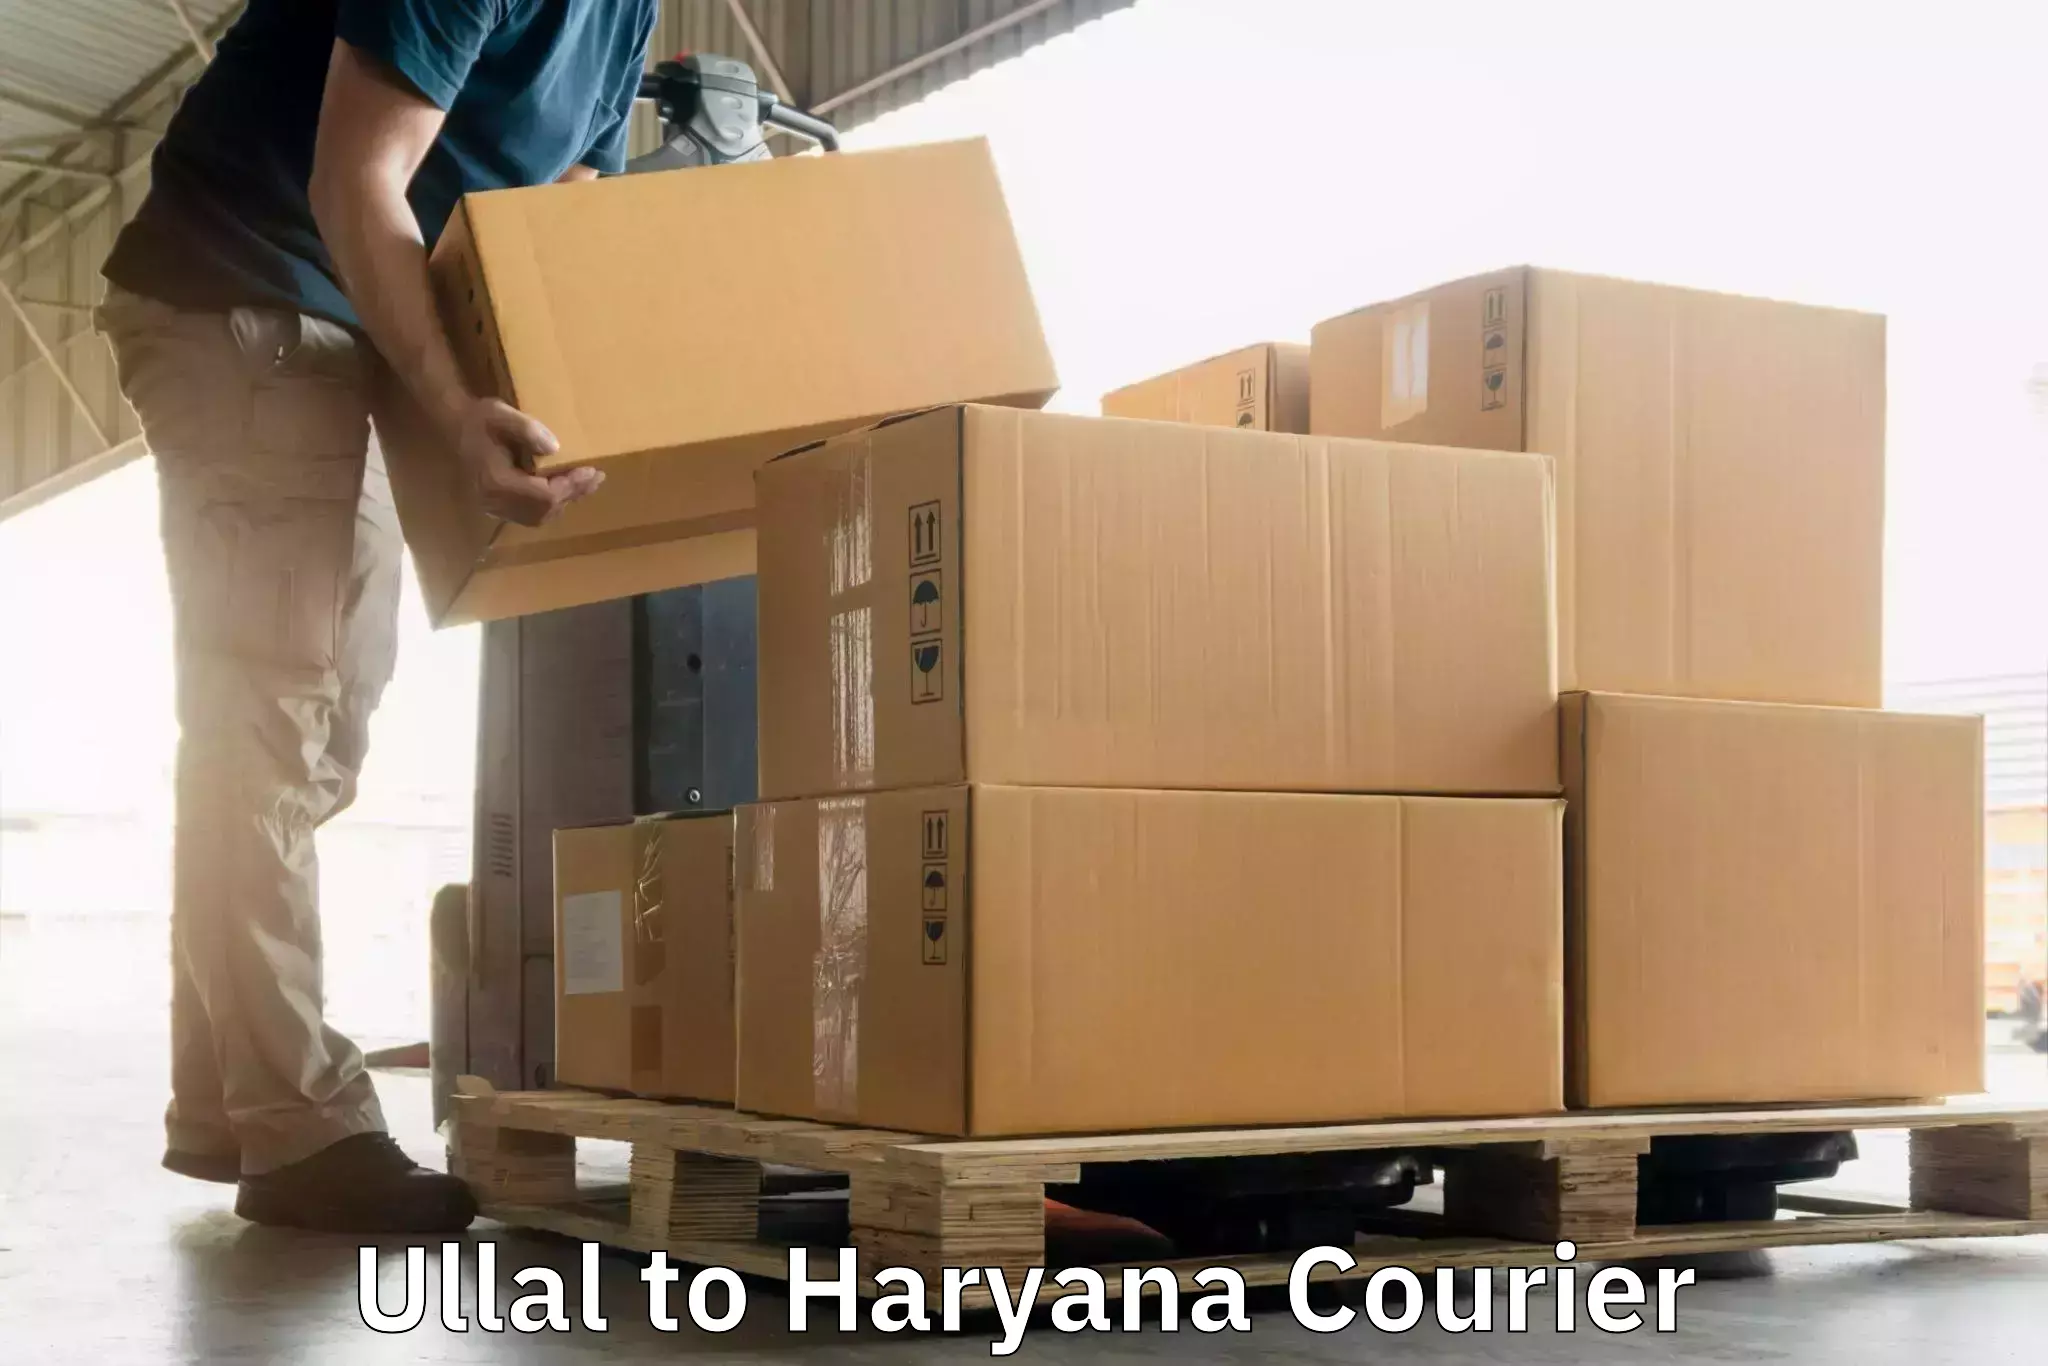 Global courier networks Ullal to Sonipat